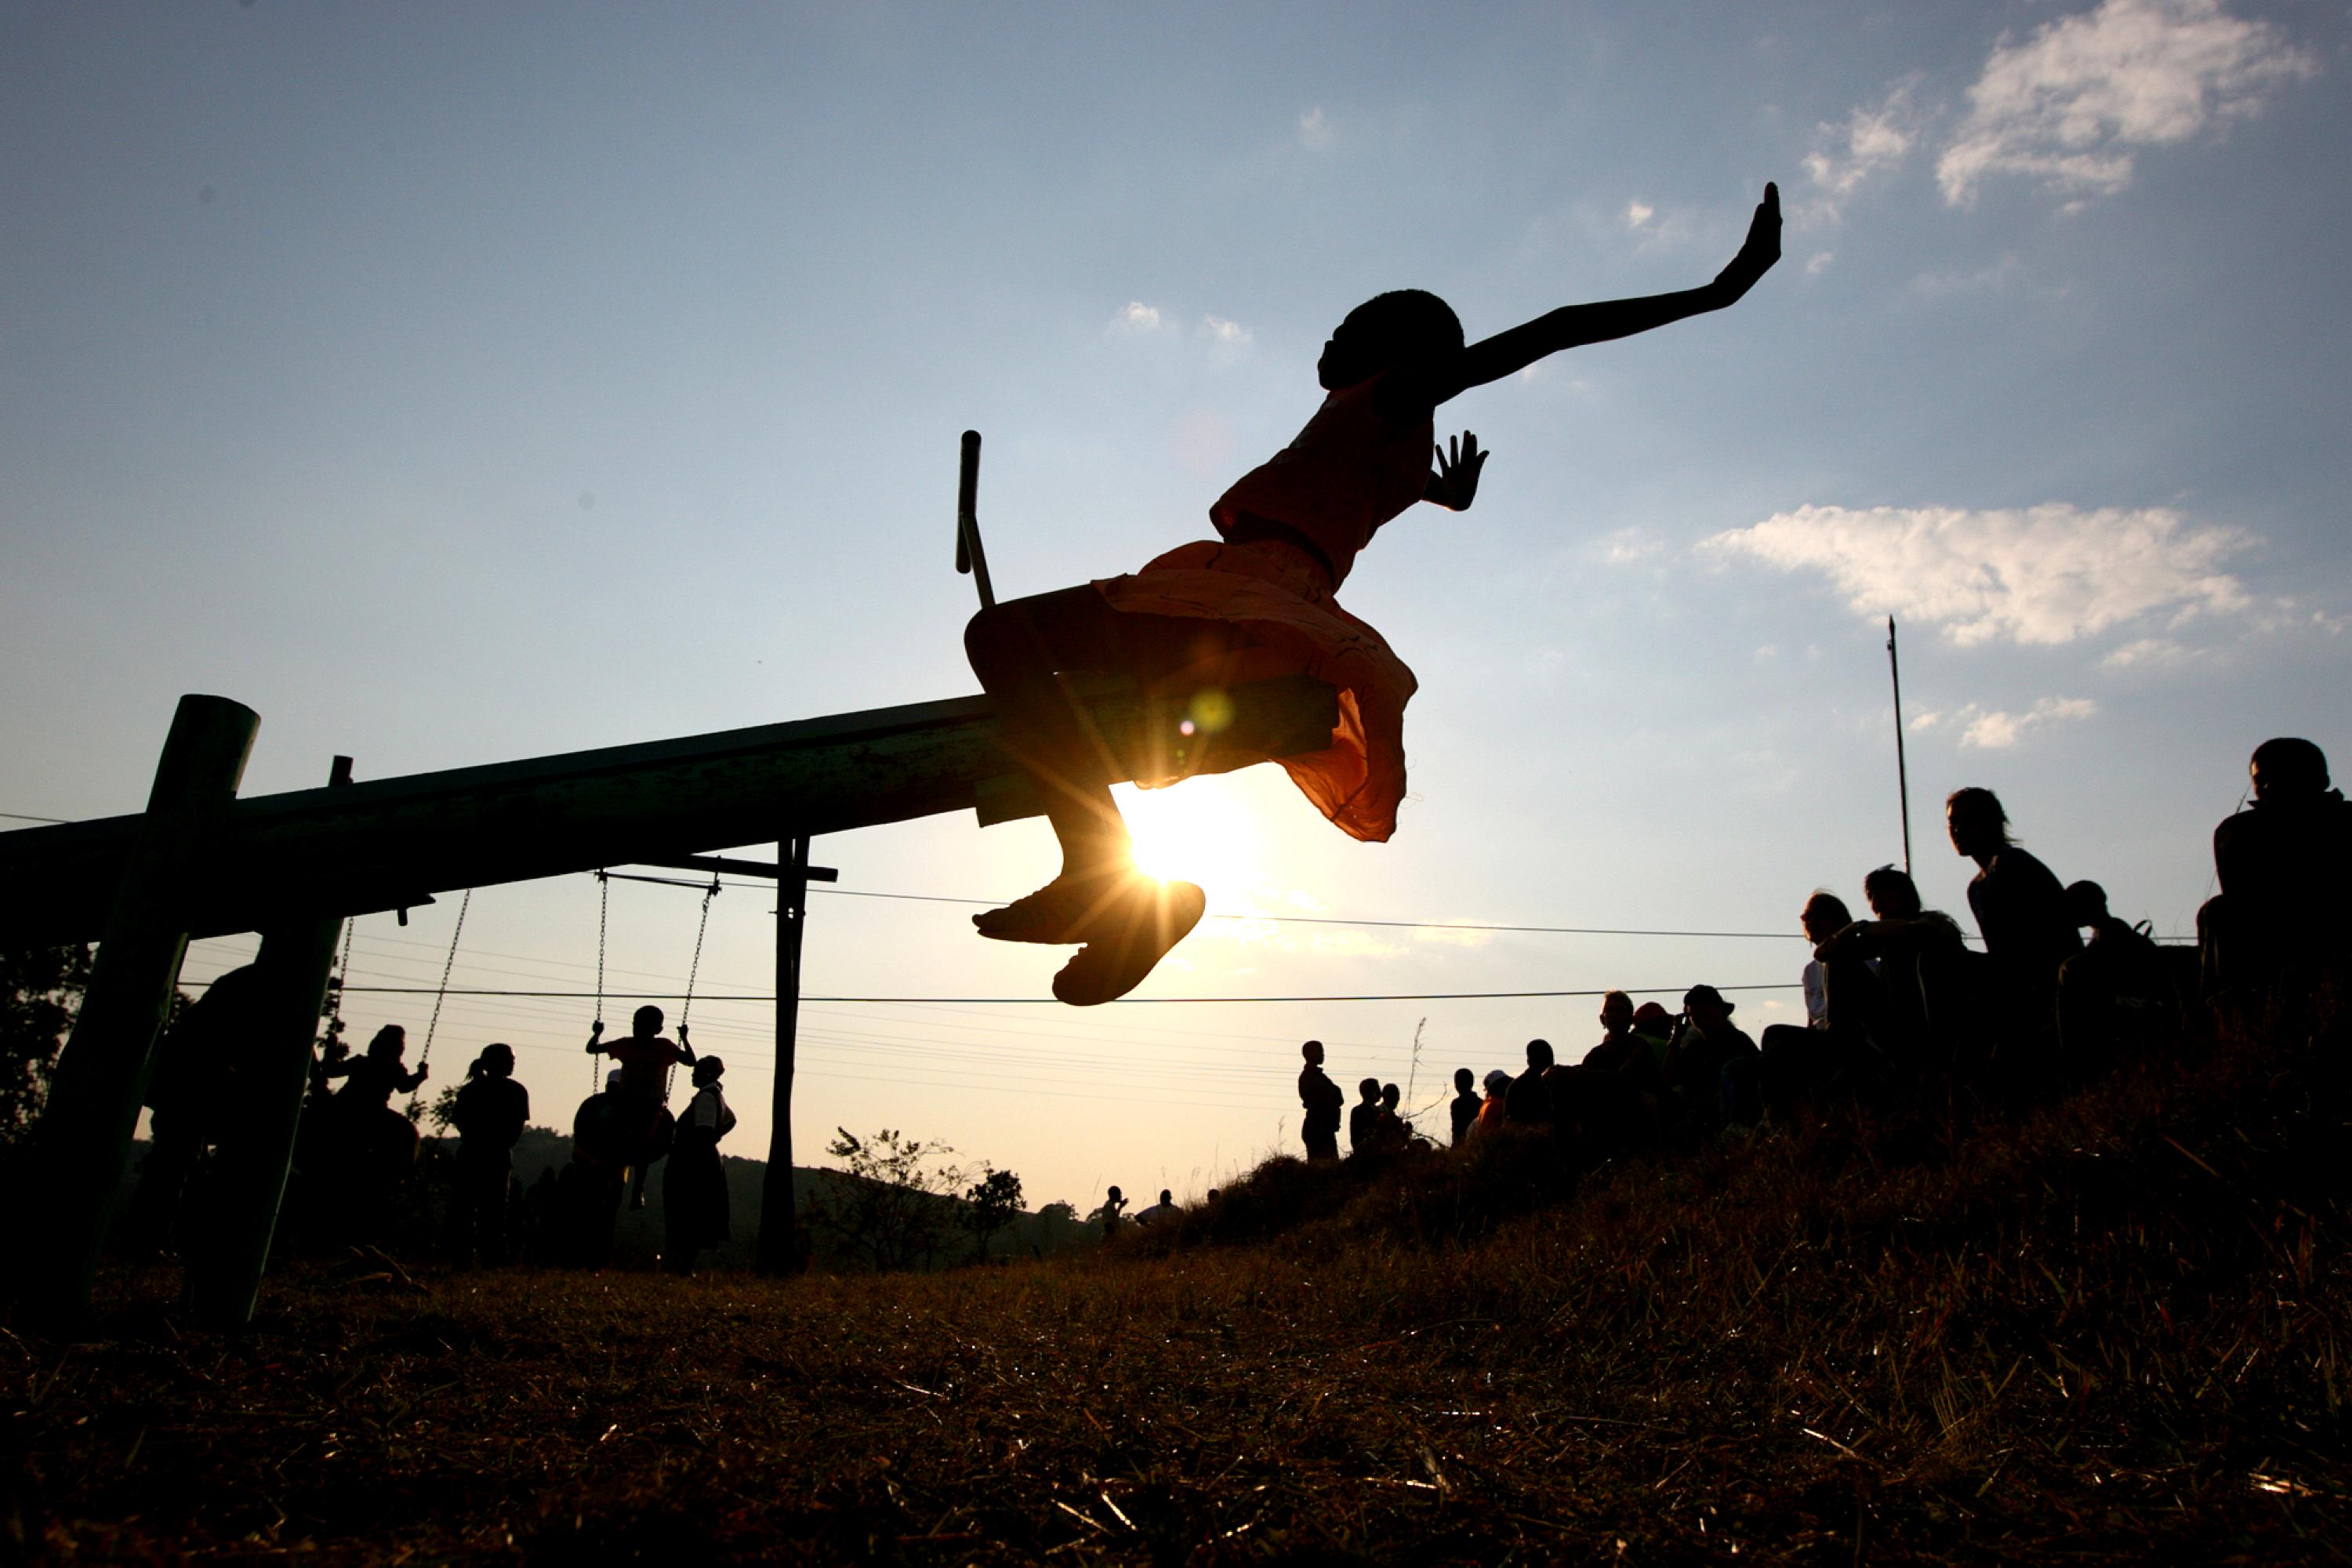 Free picture: Swaziland, sunset, young girl, playground